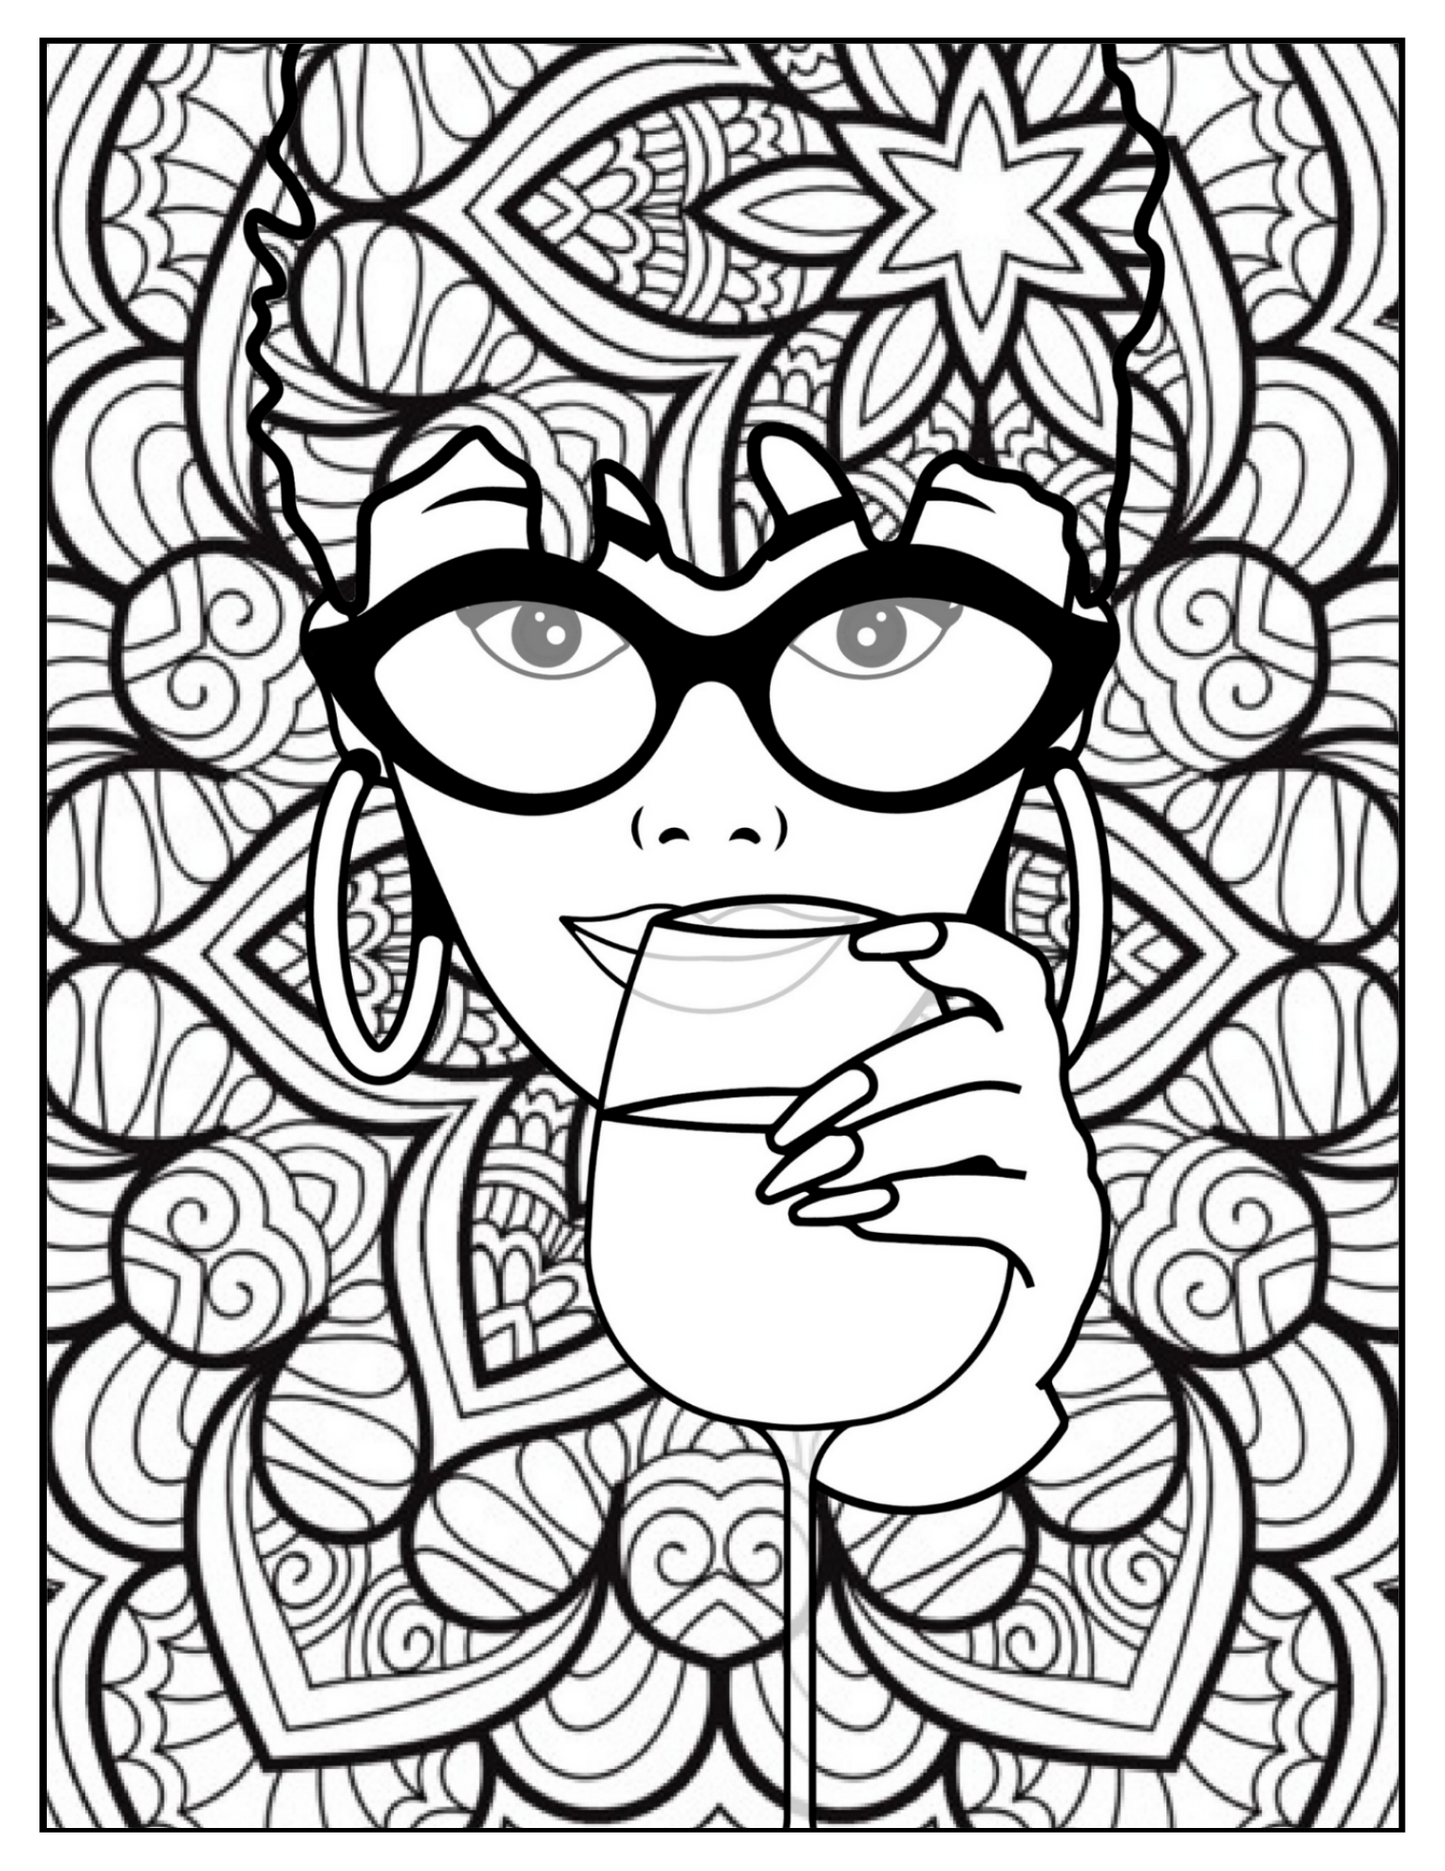 Printable Coloring Page | Avah w/ Wine Glass | 112521-10